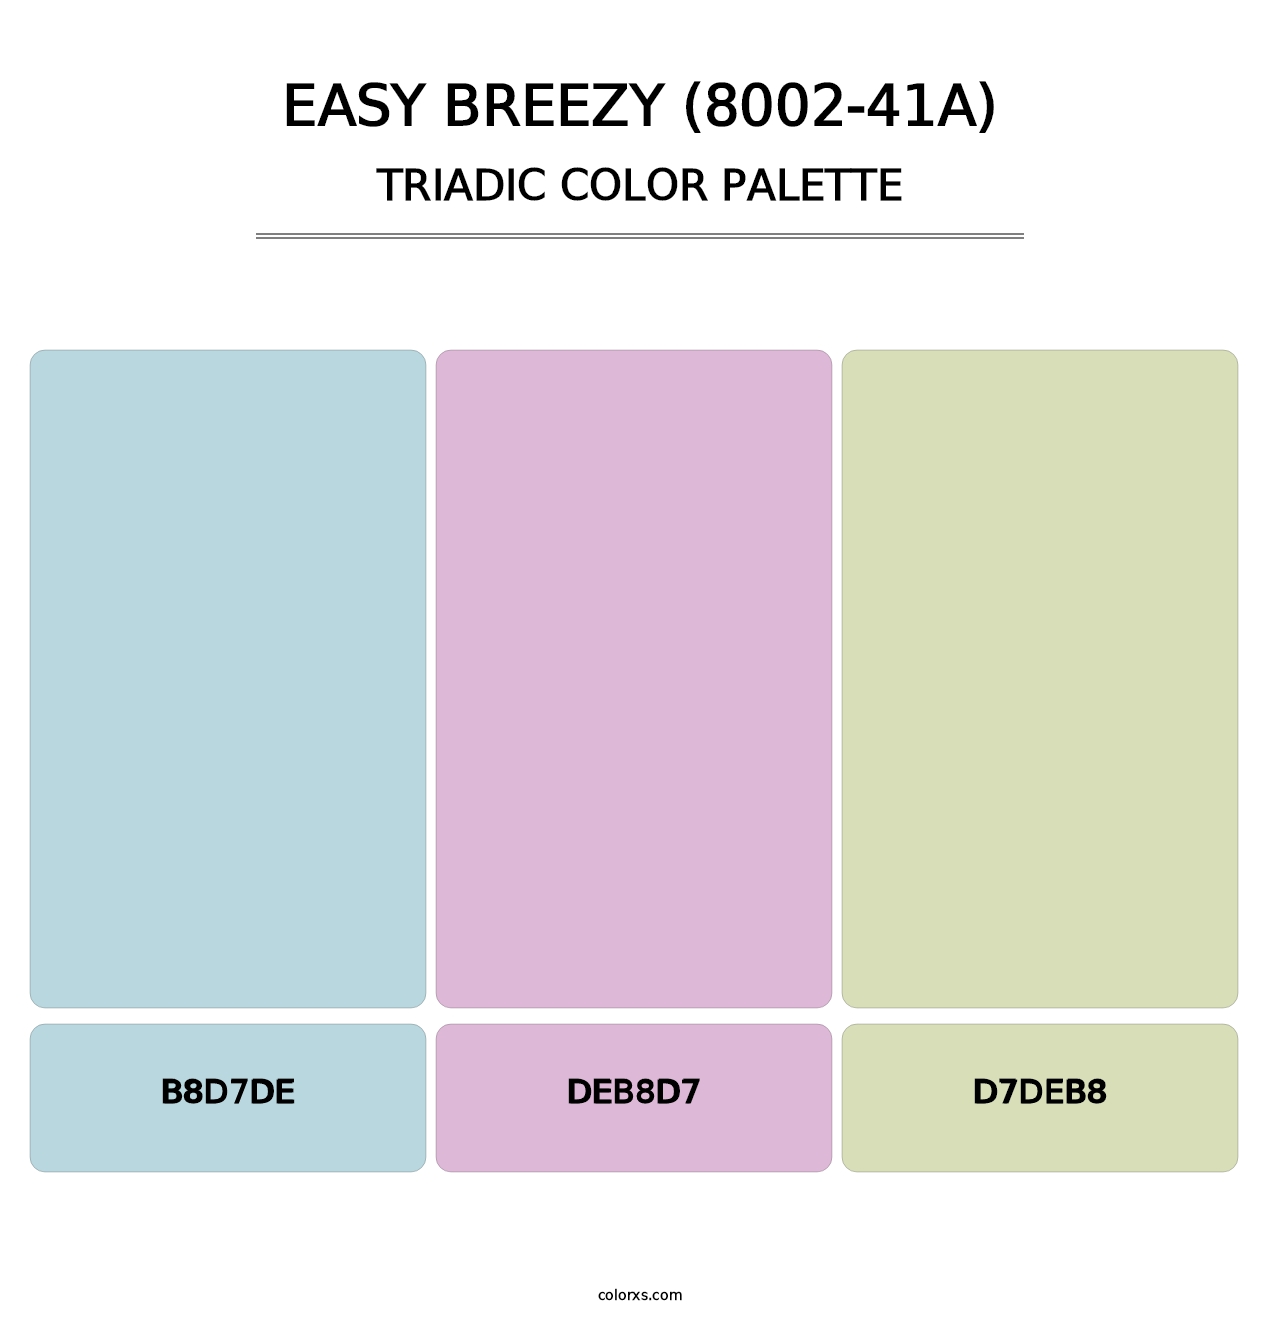 Easy Breezy (8002-41A) - Triadic Color Palette